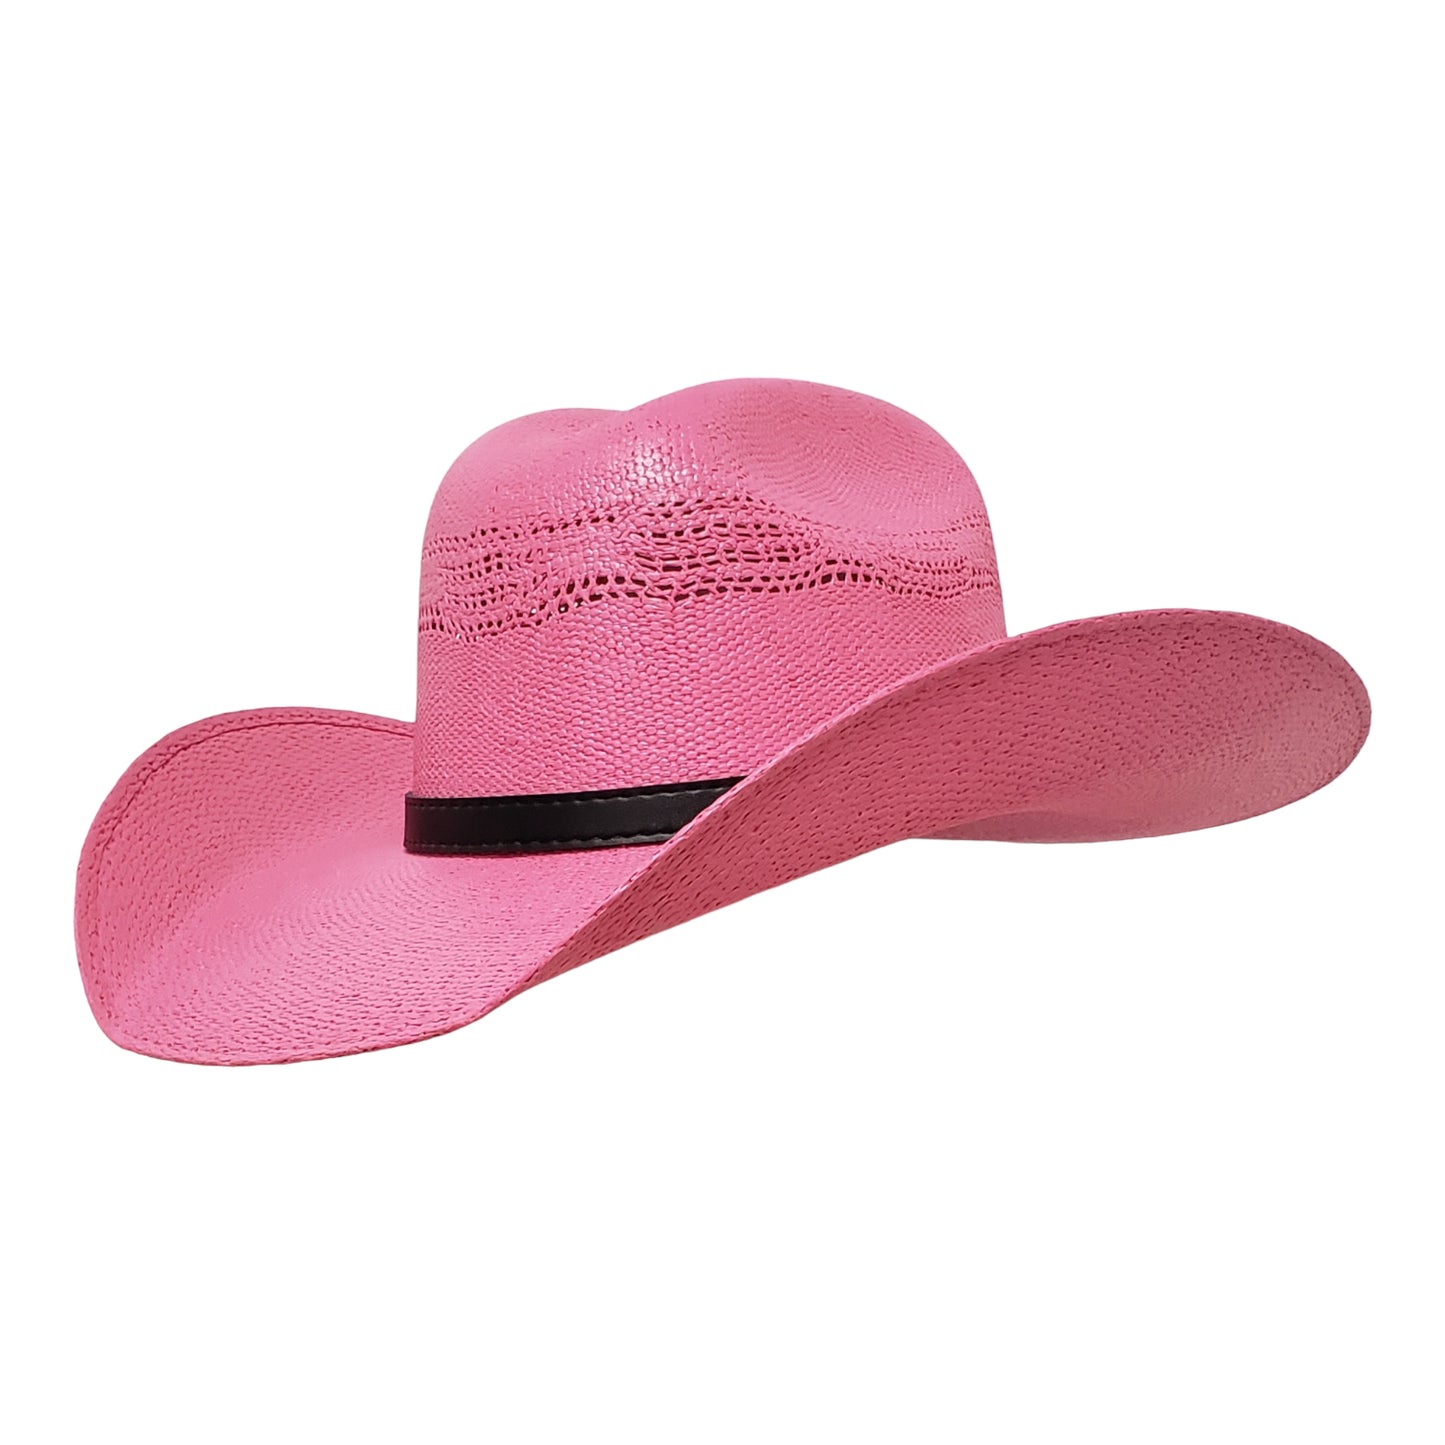 Pink straw cowgirl hat